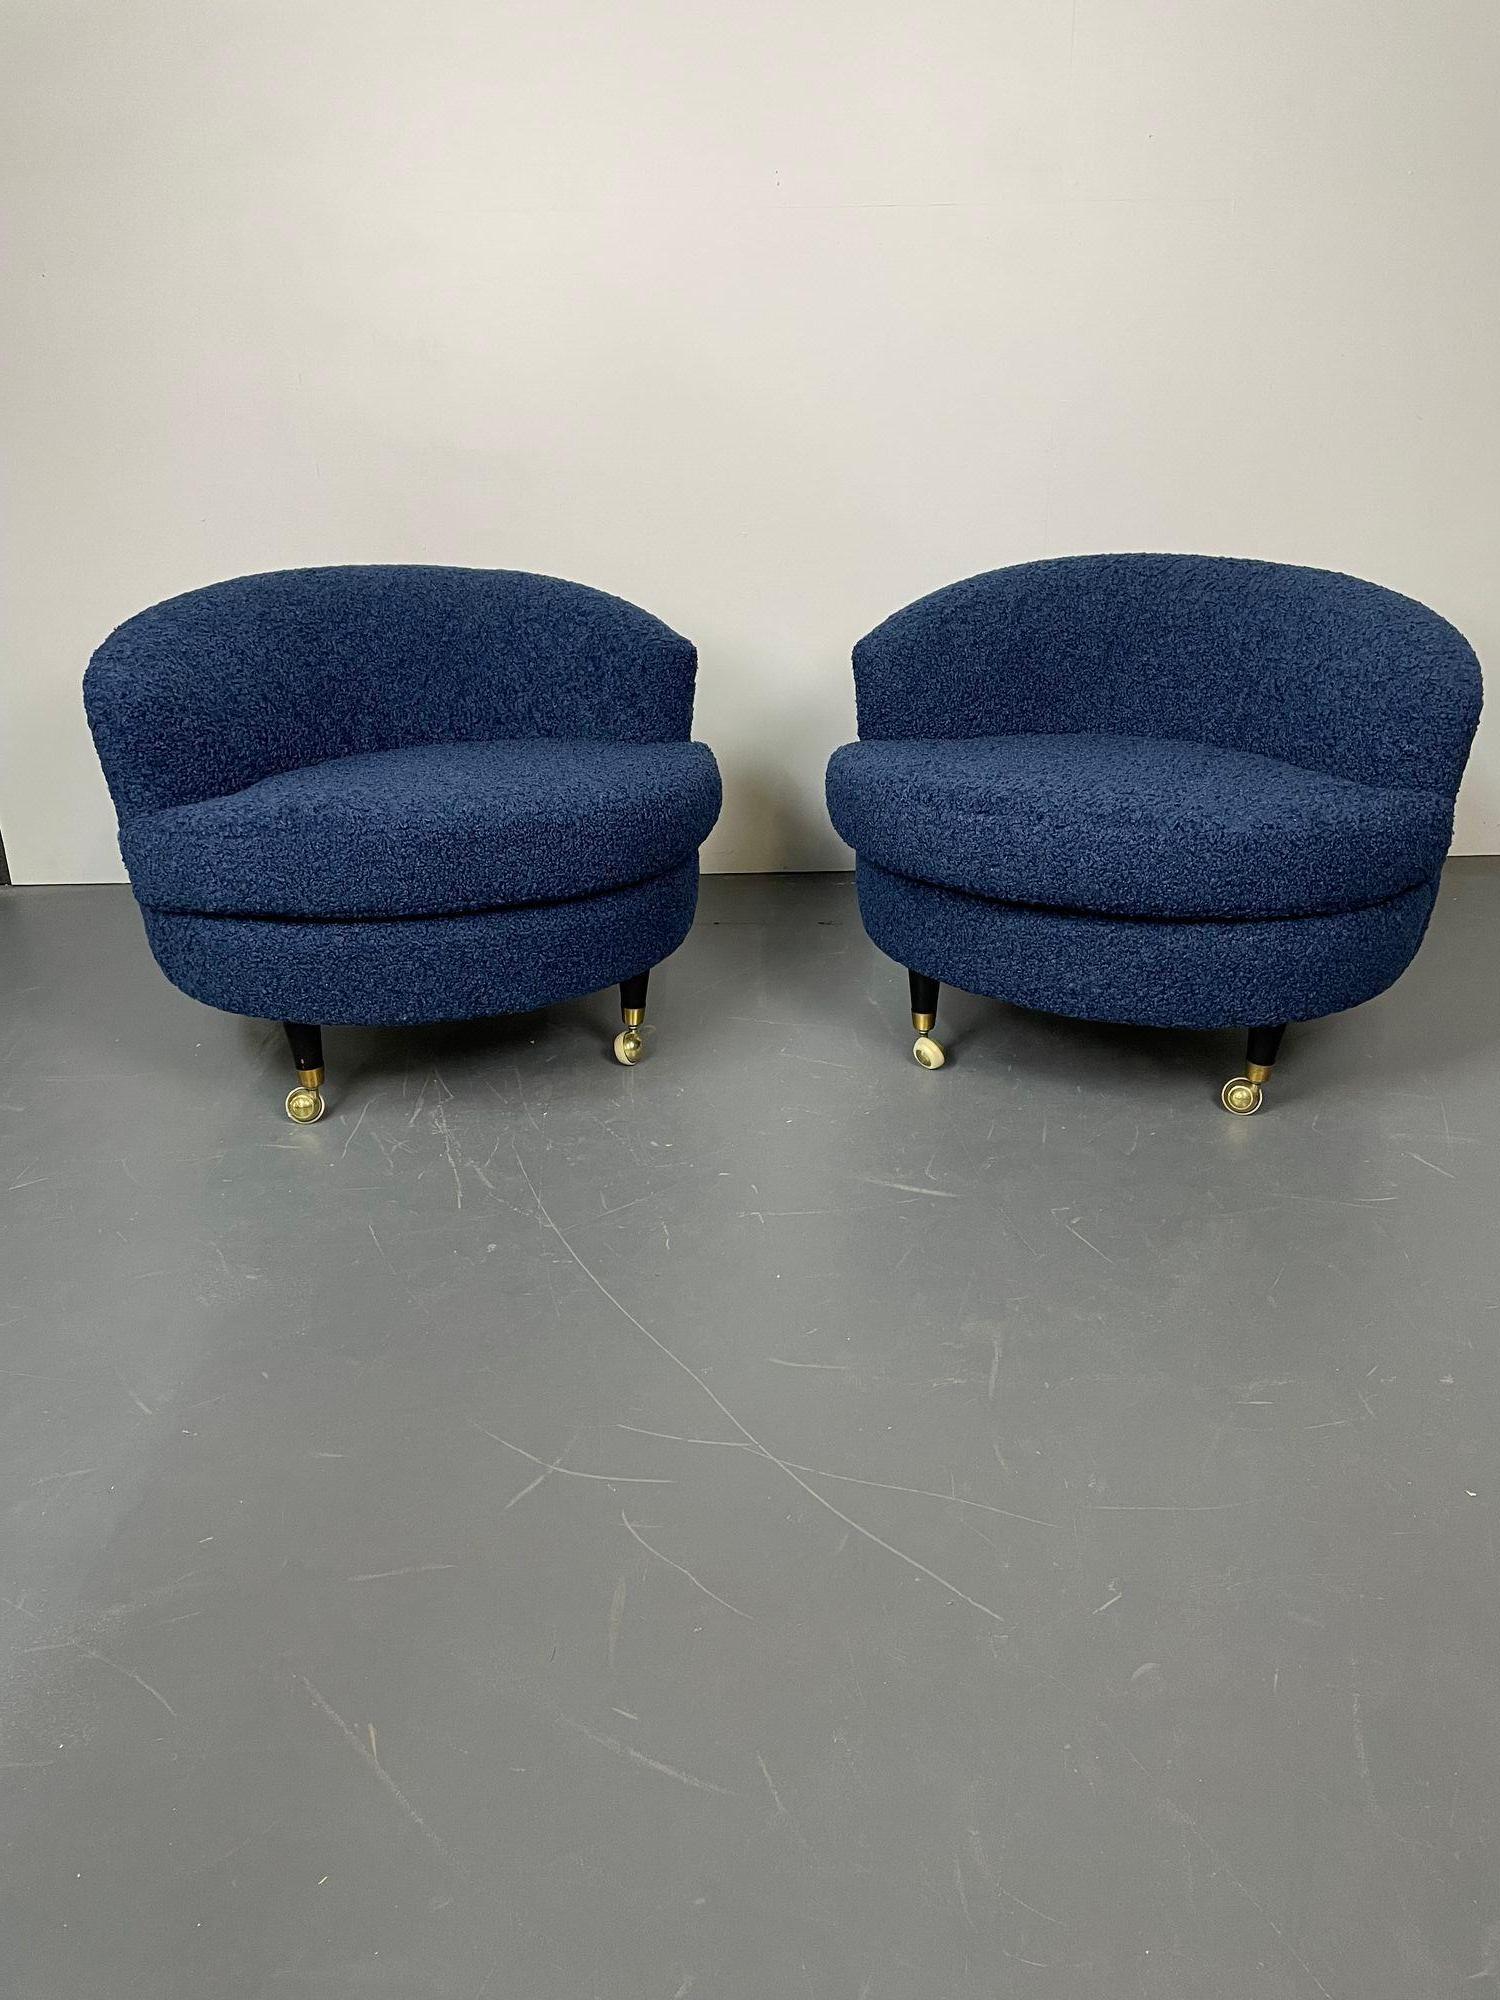 Pair of mid-century rolling swivel lounge / slipper chairs, Baughman Style
Low profile pair of rounded swivel chairs having ebony legs sitting on wheels. Newly re-upholstered in a fun and luxurious blue faux Sherpa/boucle material. Chair maintains